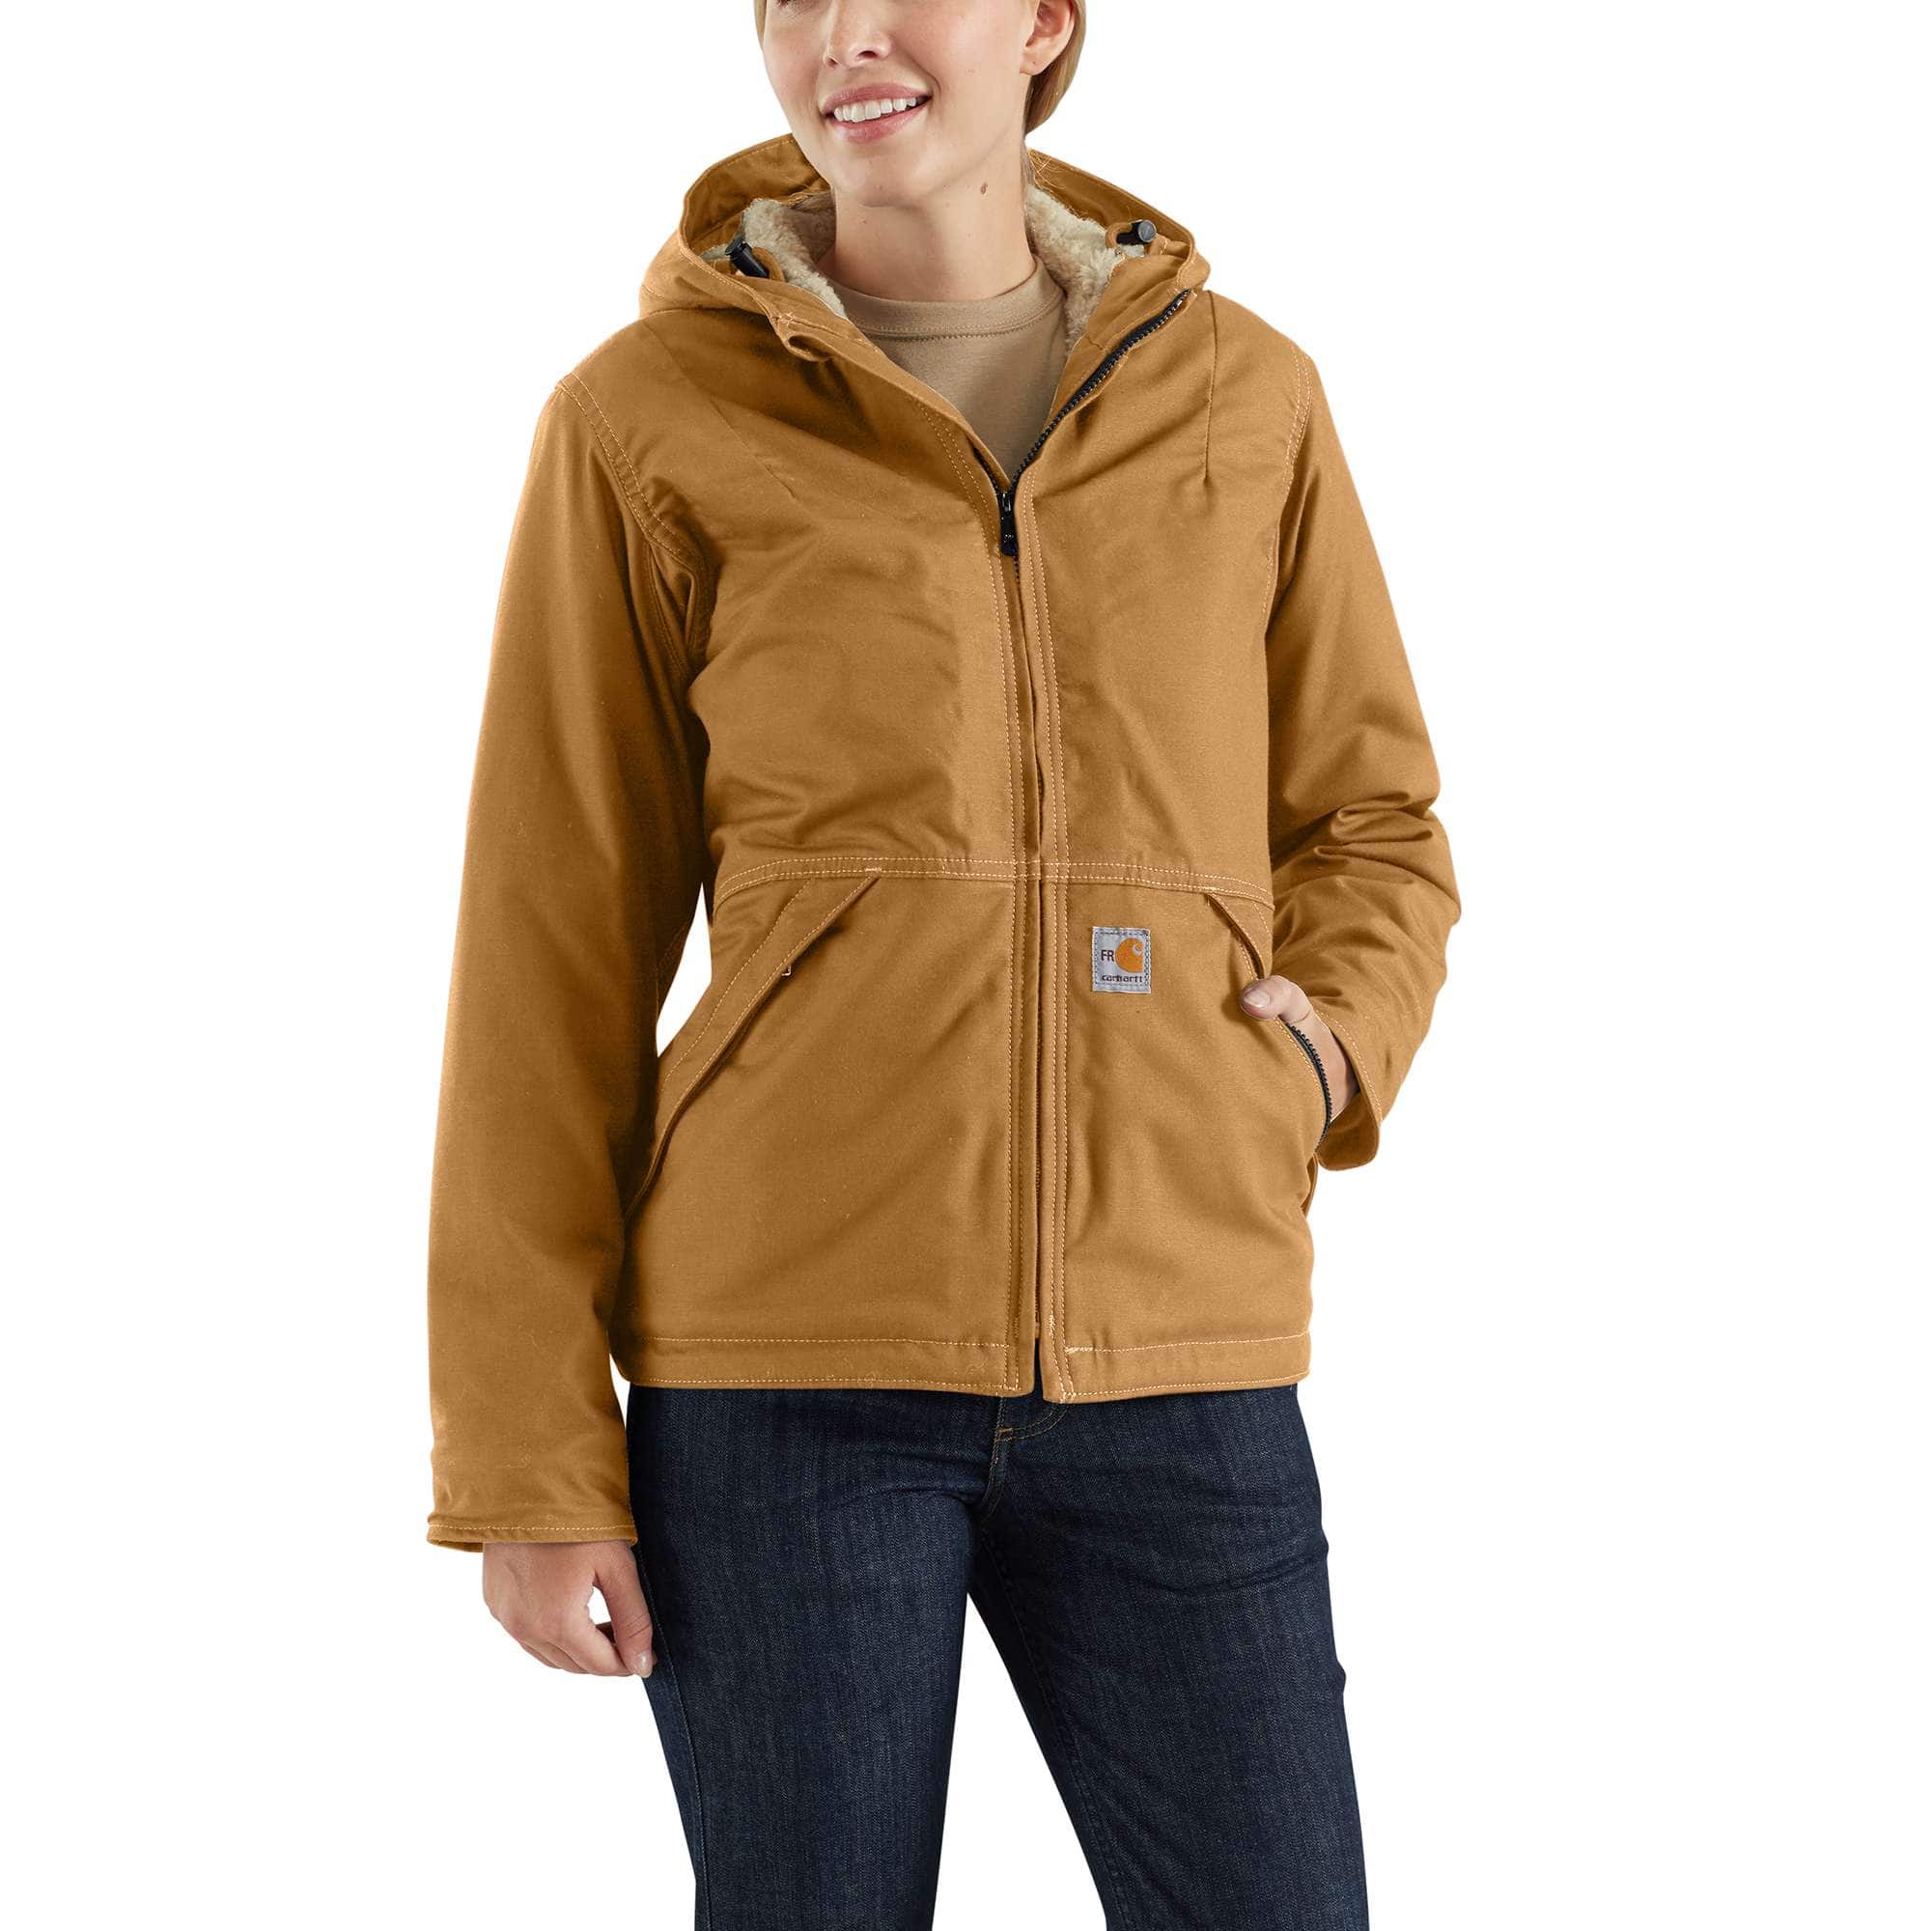 Women's Flame-Resistant Full Swing® Quick Duck® Jacket/Sherpa-Lined - 3 Warmest Rating